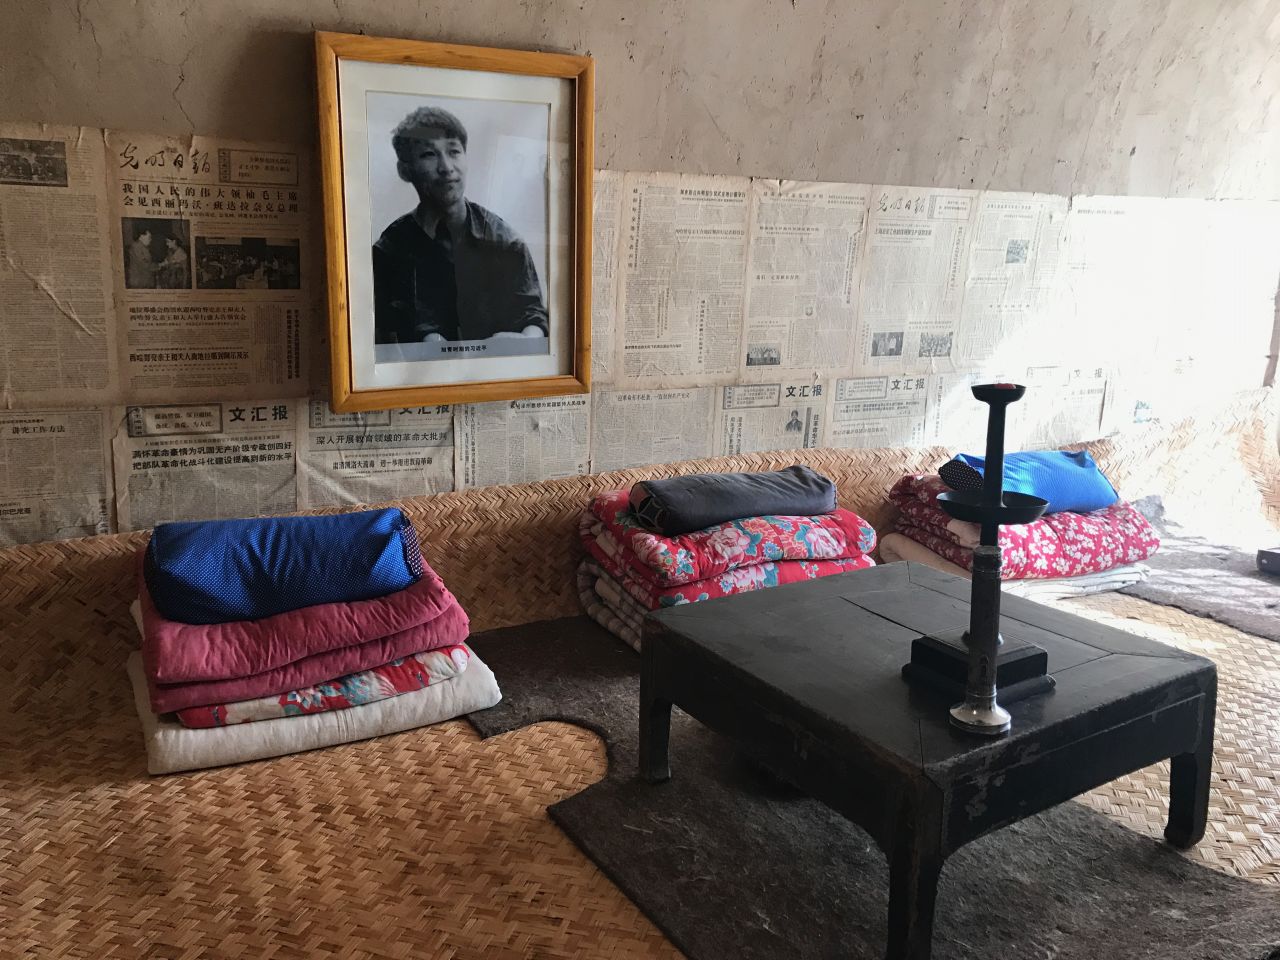 A photo of a youthful Xi as well as old newspapers adorn the wall above his old shared bed in a "cave house."